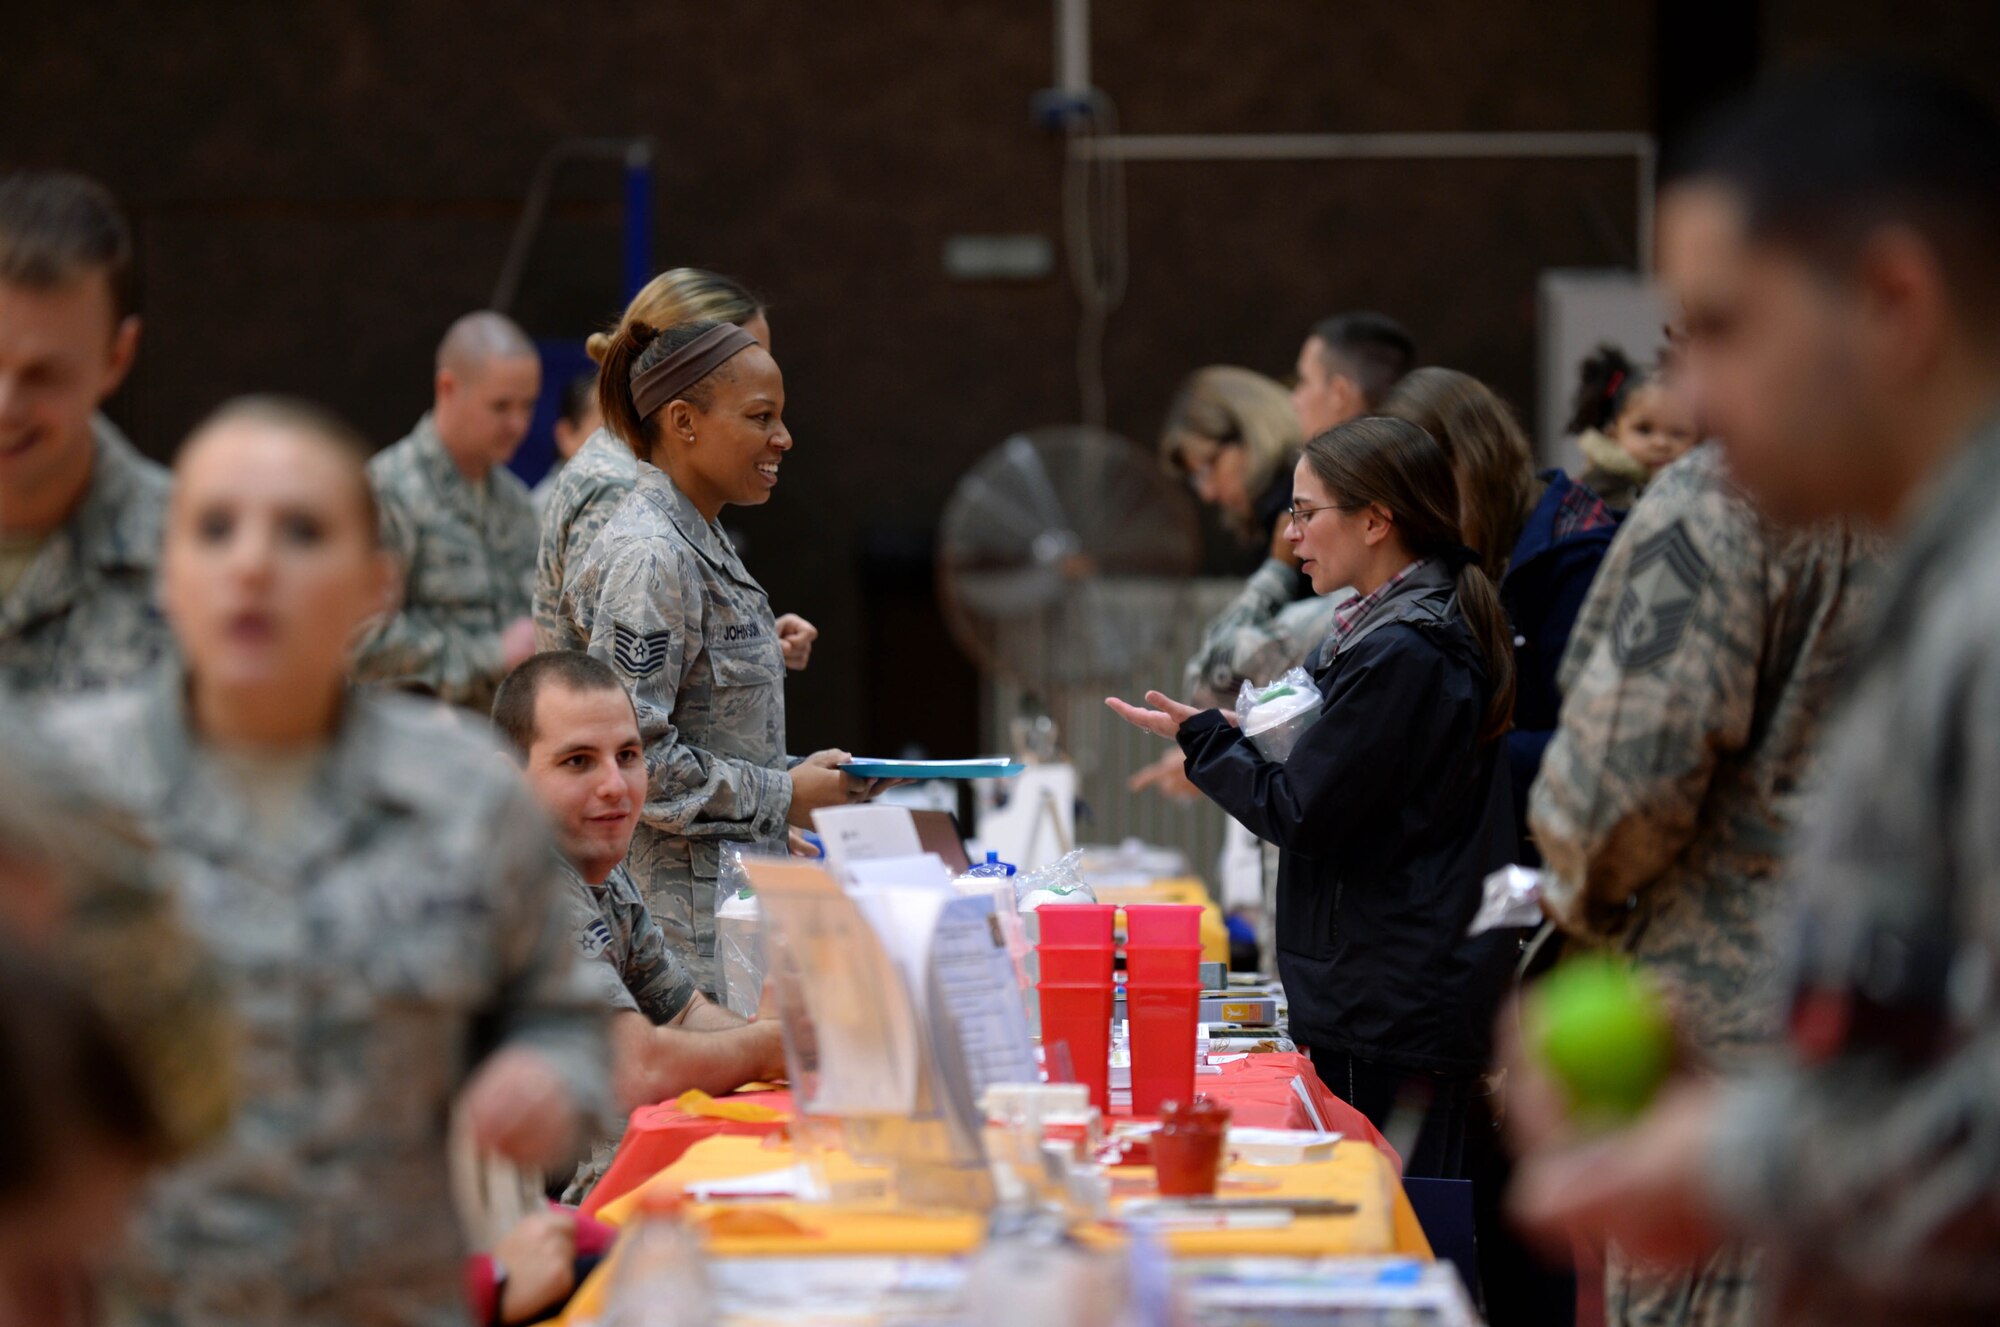 U.S. Air Force Tech. Sgt. Ann Johnson, 52nd Medical Operations Squadron’s Pediatrics Clinic medical technician from Musella, Georgia, center left, provides free information and health checks to a member of the  Spangdahlem community during the 2014 Fall Harvest Health Fair at the Skelton Memorial Fitness Center at Spangdahlem Air Base, Germany, Nov. 5, 2014. More than 30 base agencies provided information and promoted health. (U.S. Air Force photo by Airman 1st Class Timothy Kim/Released)